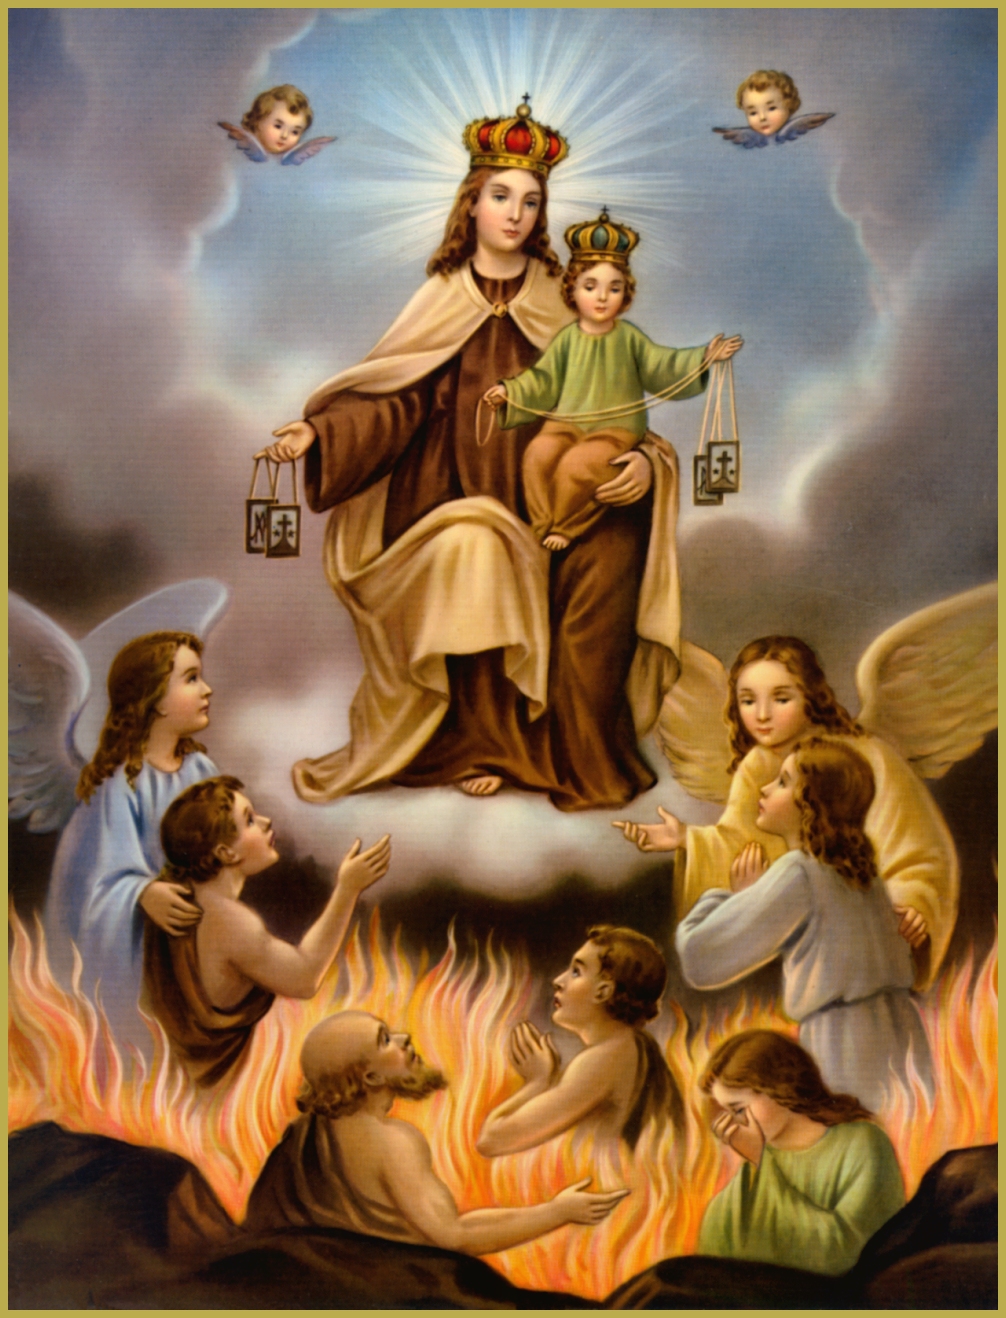 OUR LADY OF MOUNT CARMEL